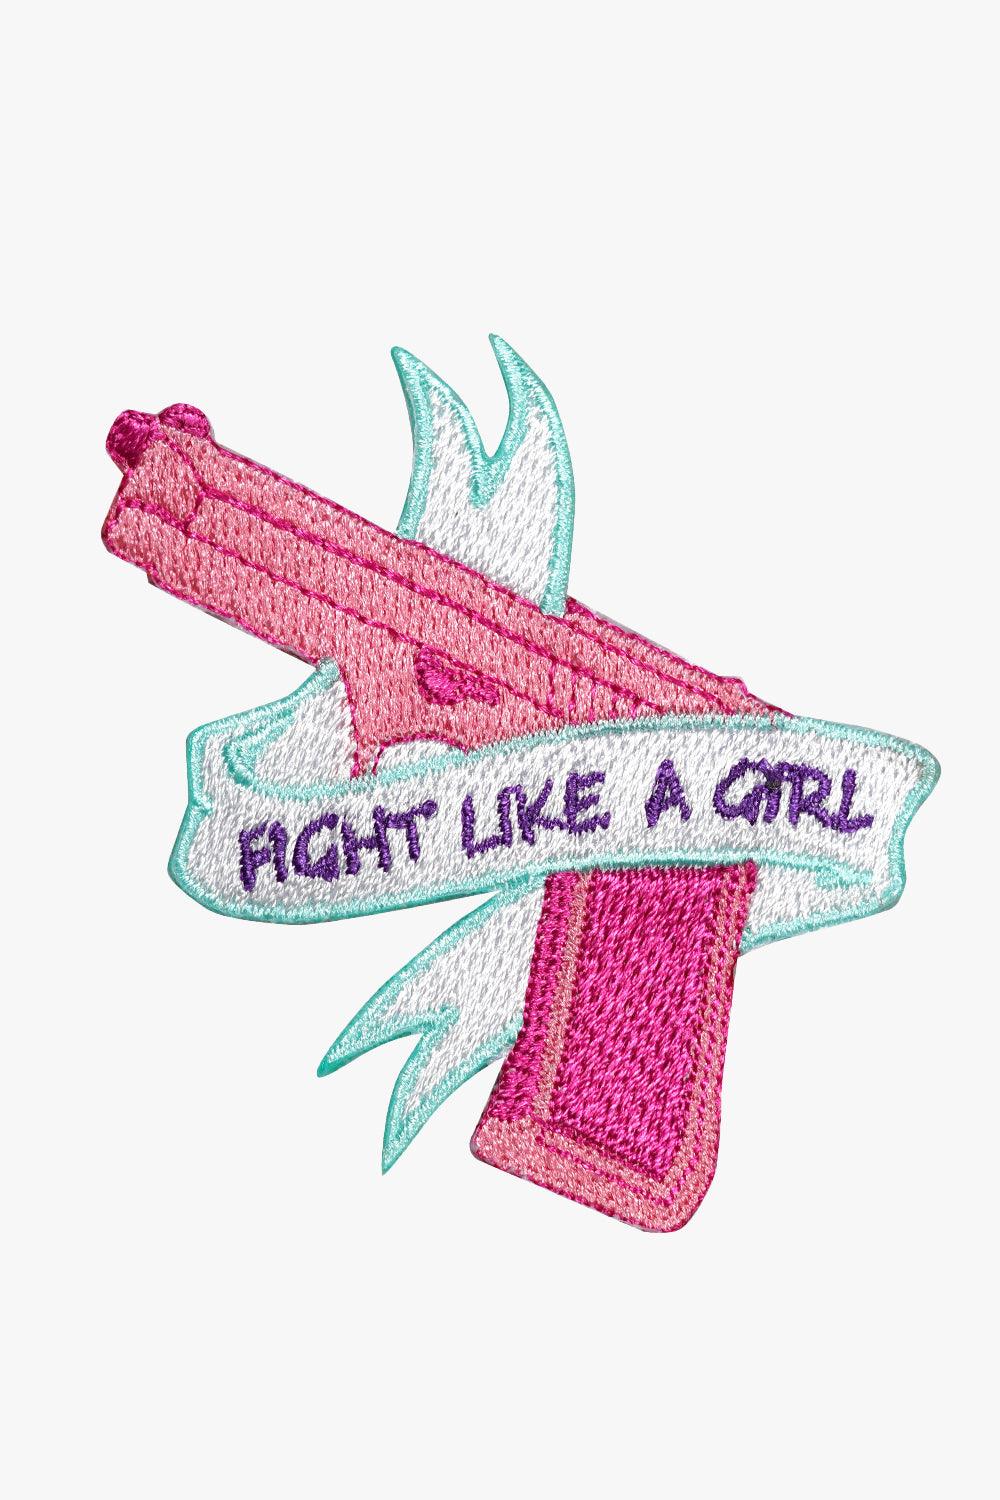 Fight Like A Girl Pink Pistol Patch - Aesthetic Clothes Shop